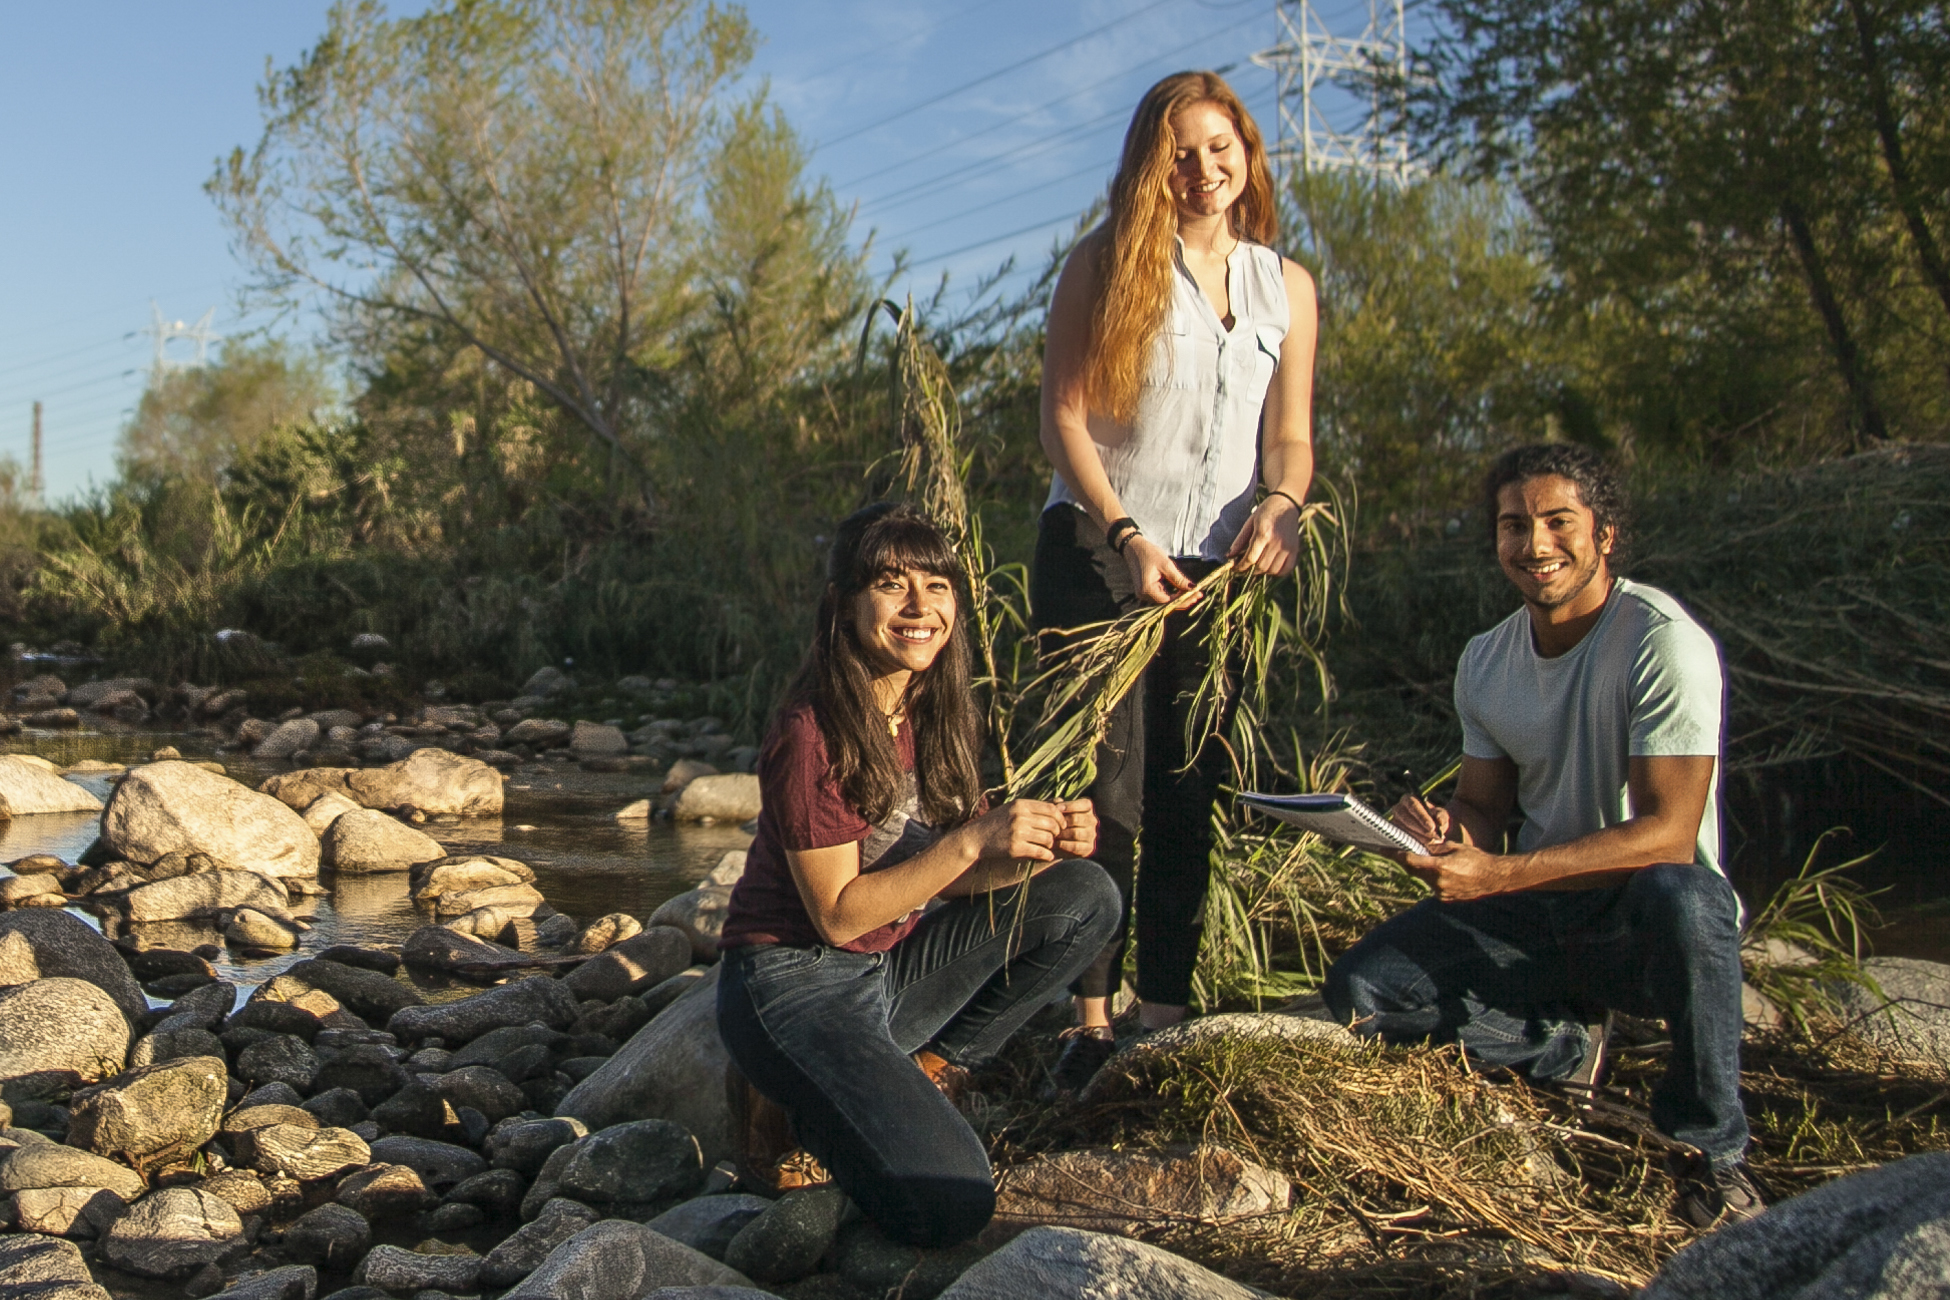 A female with long hair stands upright holding broken branches in her hands while another female and a male crouch down collecting additional branches and recording their work on paper as they clean up the Los Angeles River